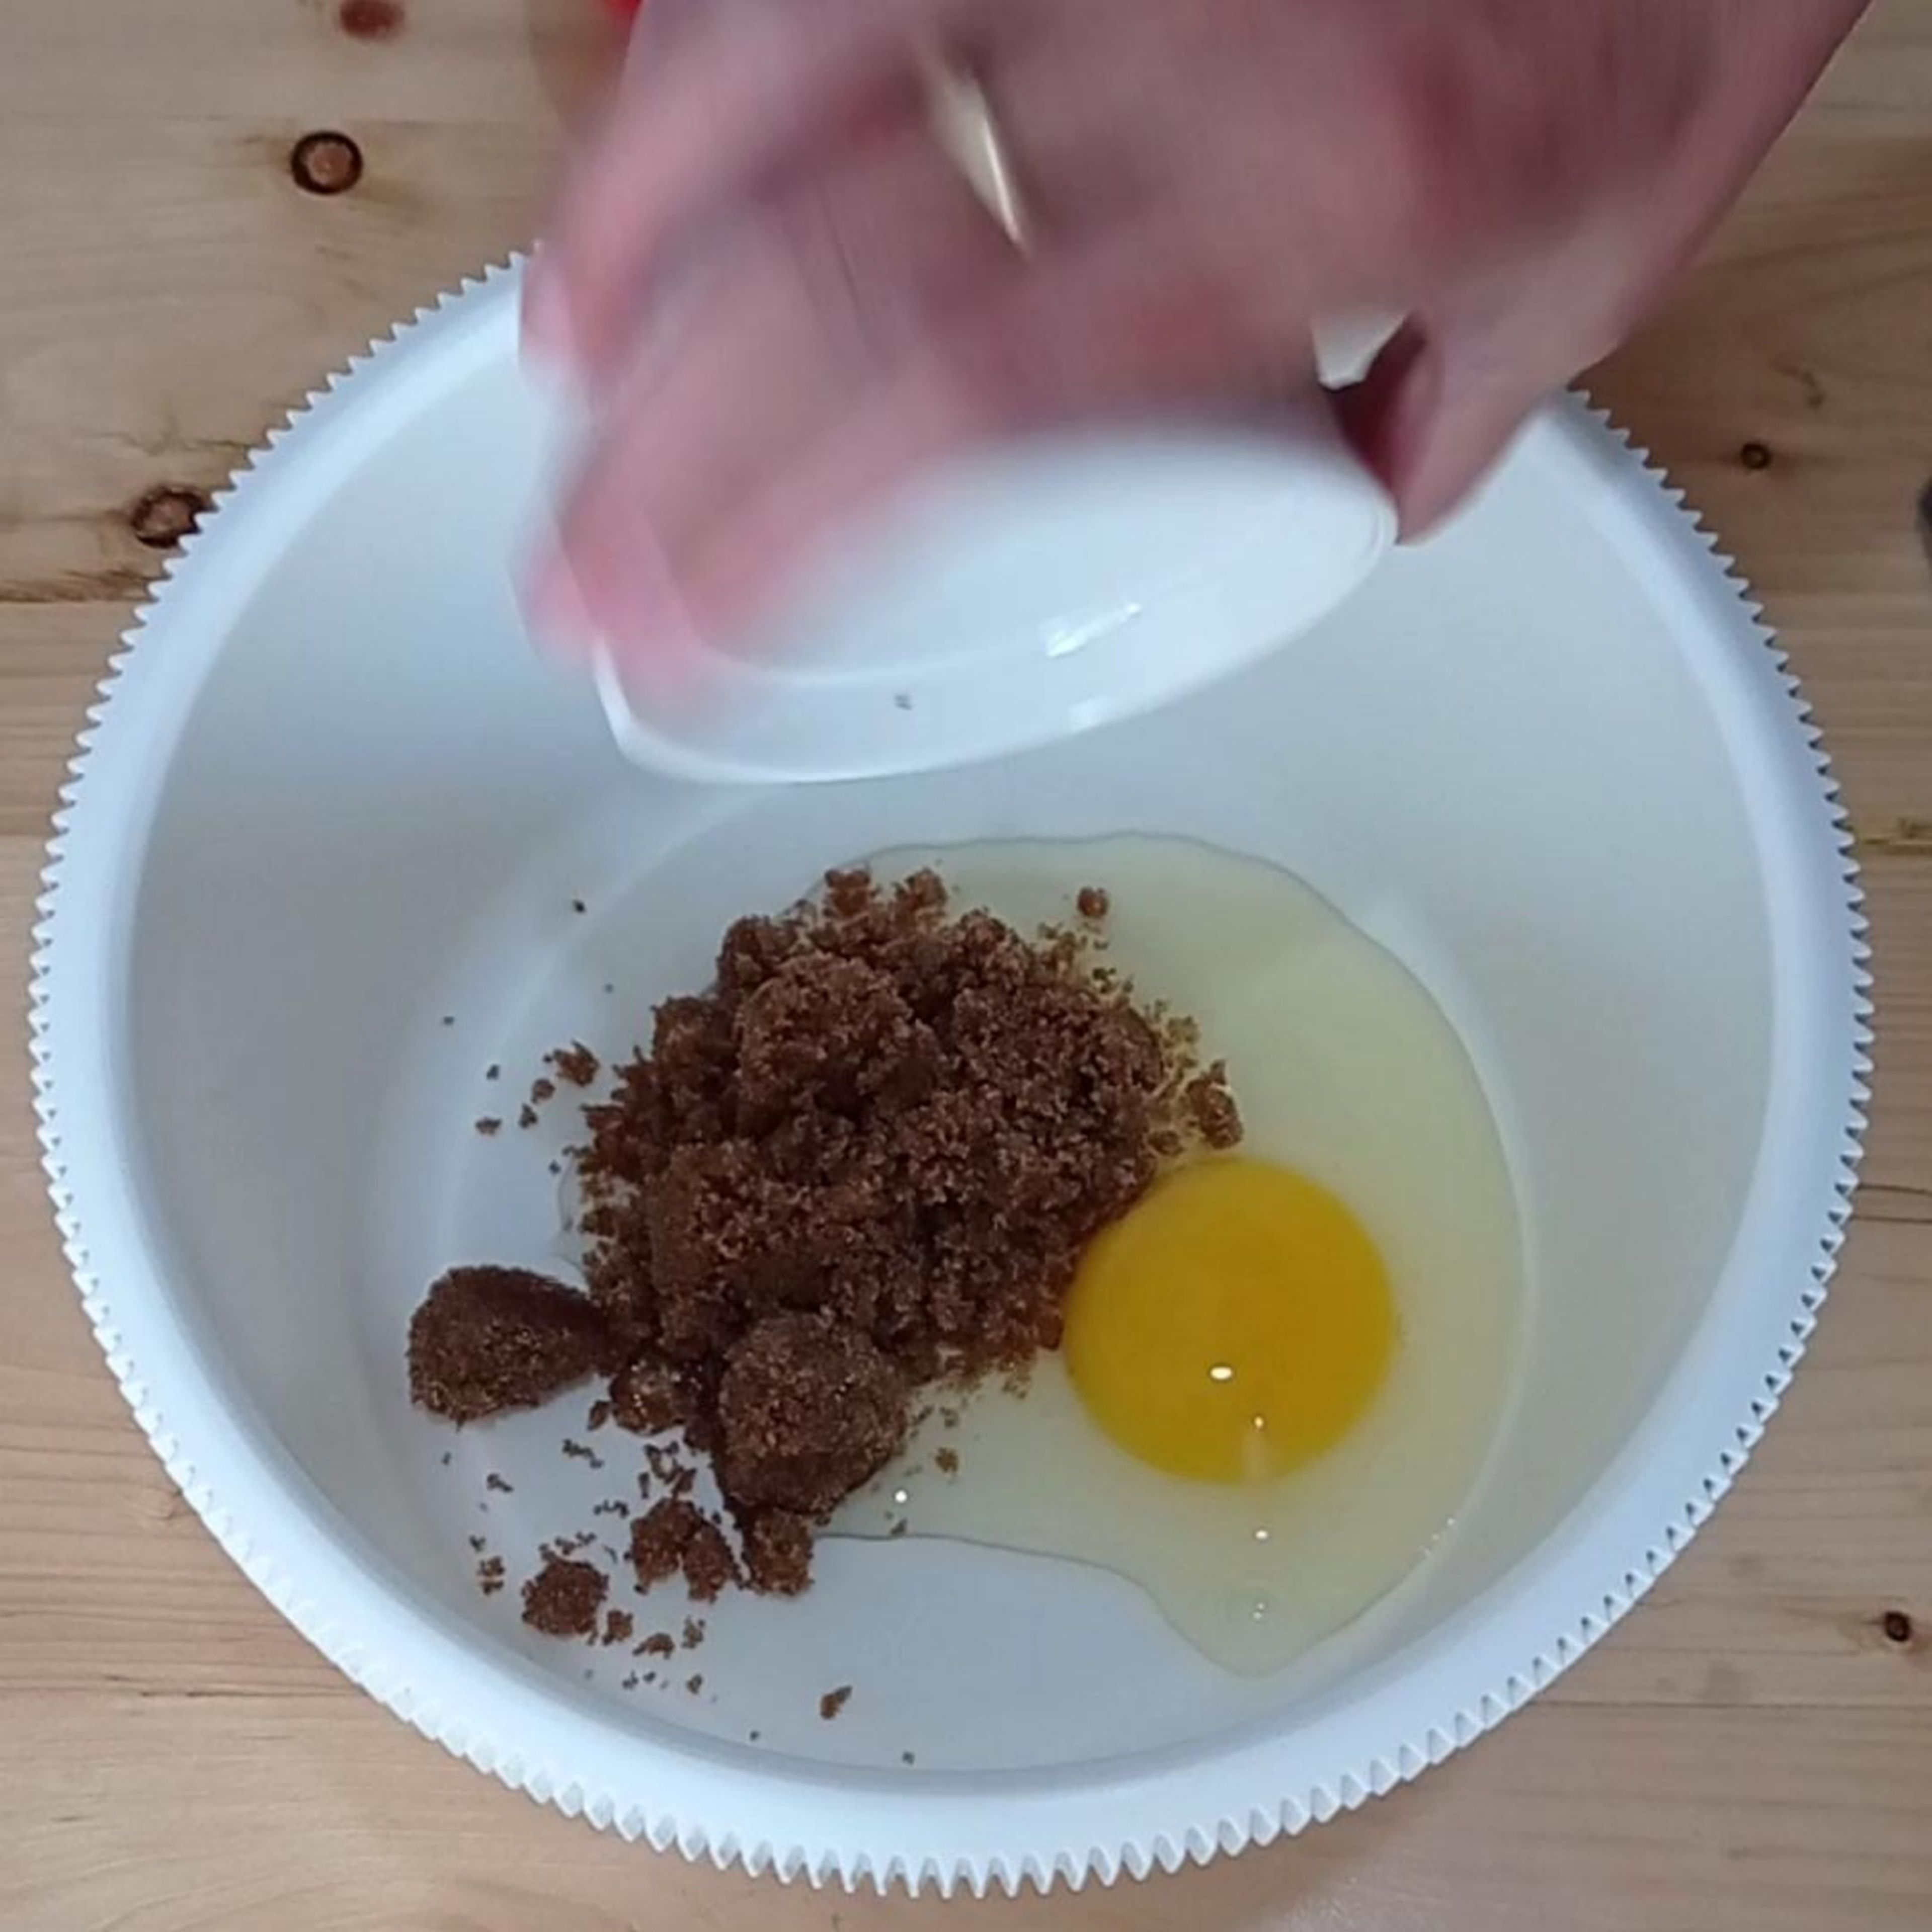 In the medium bowl, beat egg and brown sugar until fluffy.